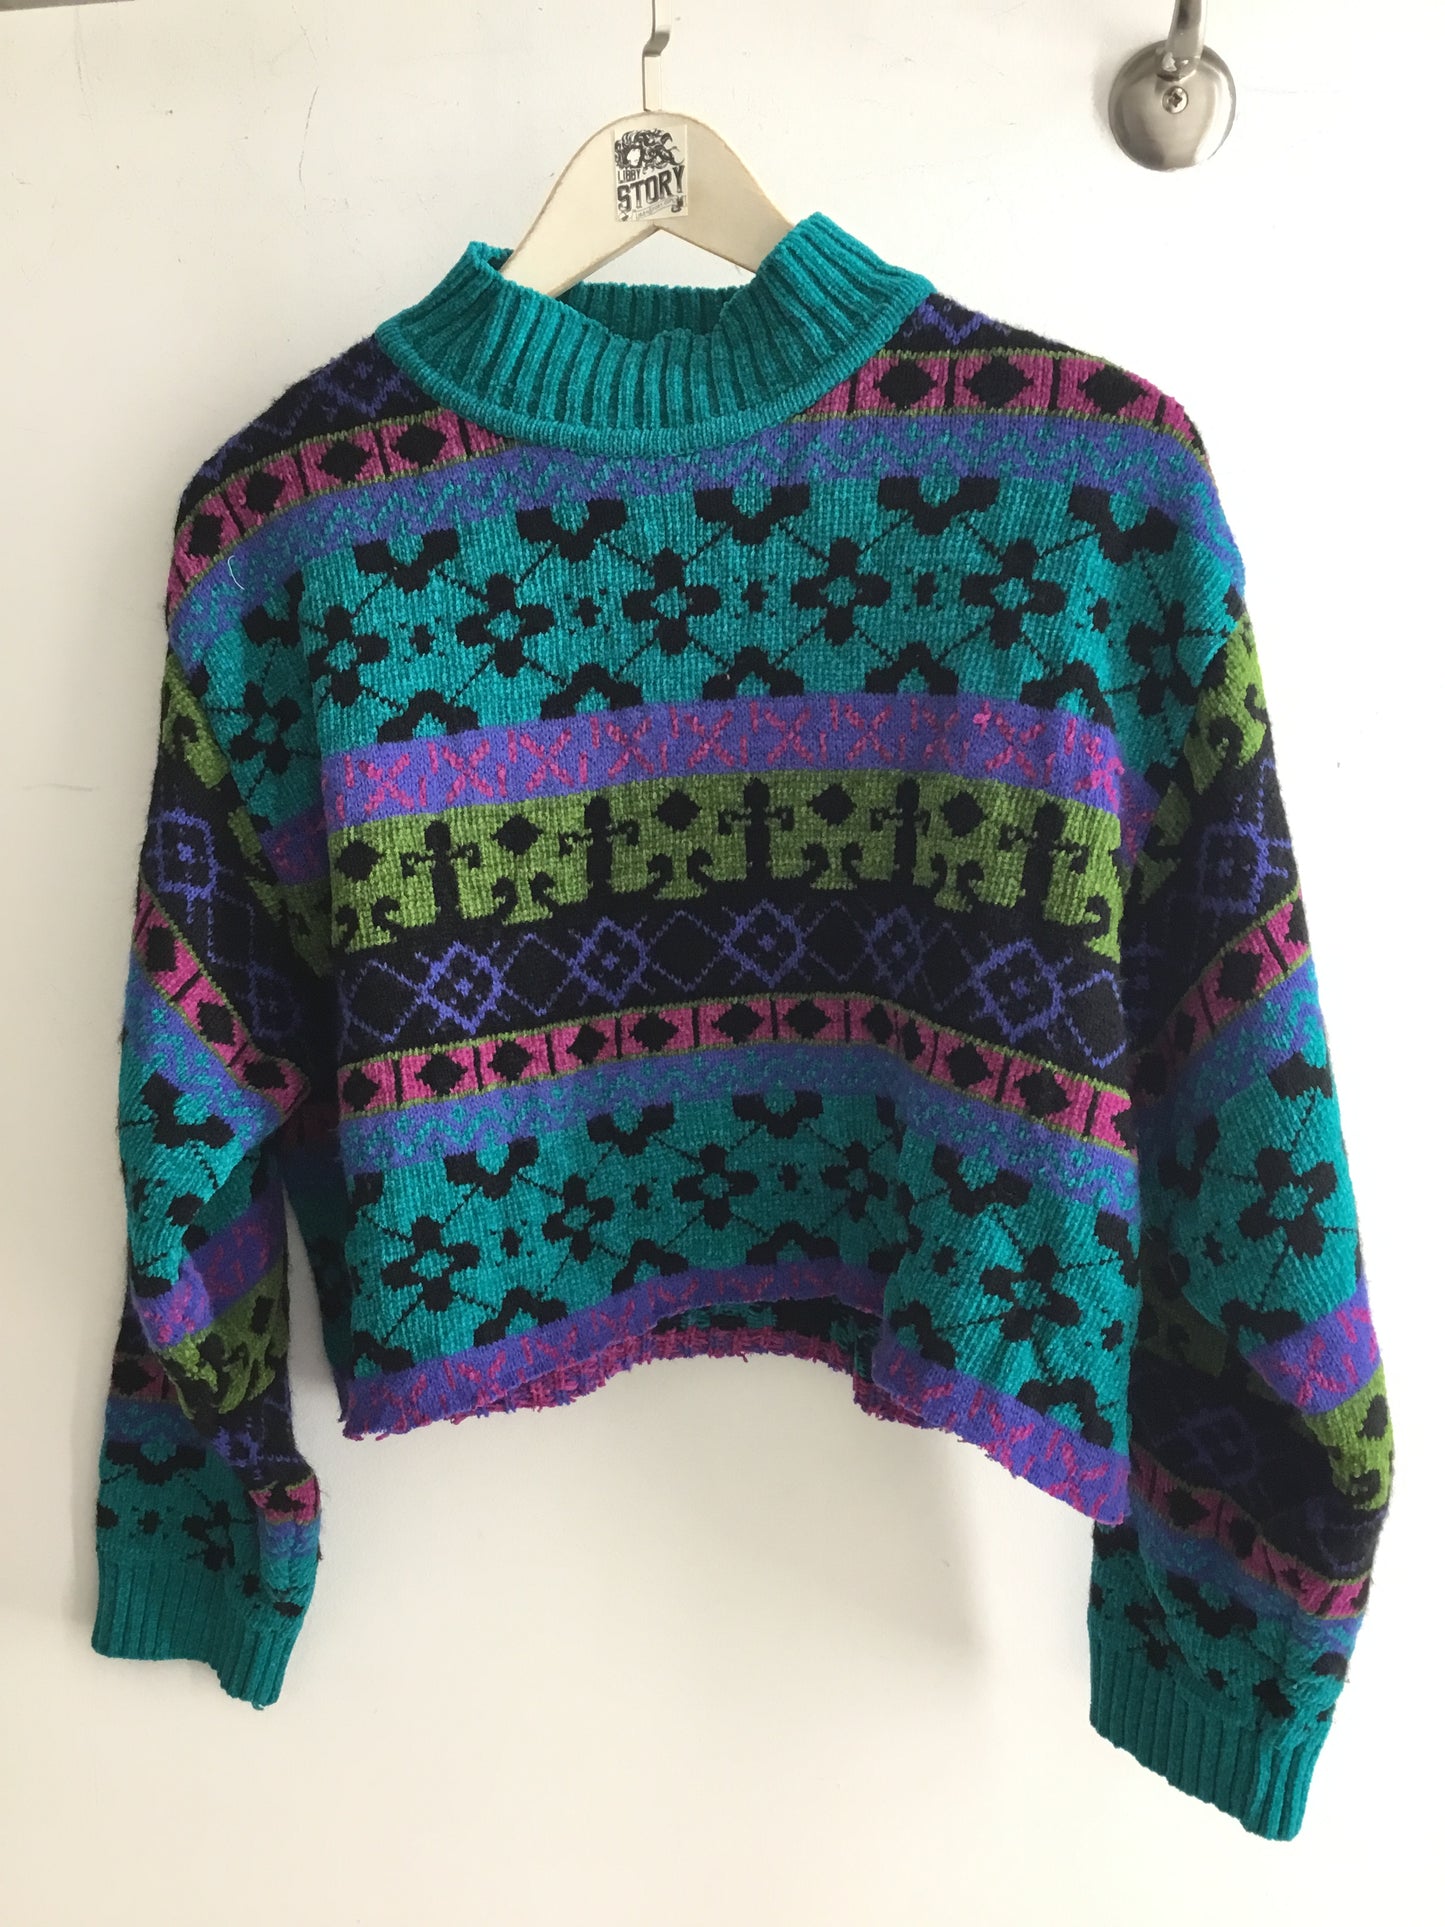 Libby Story Upcycled Vintage Crop Sweater